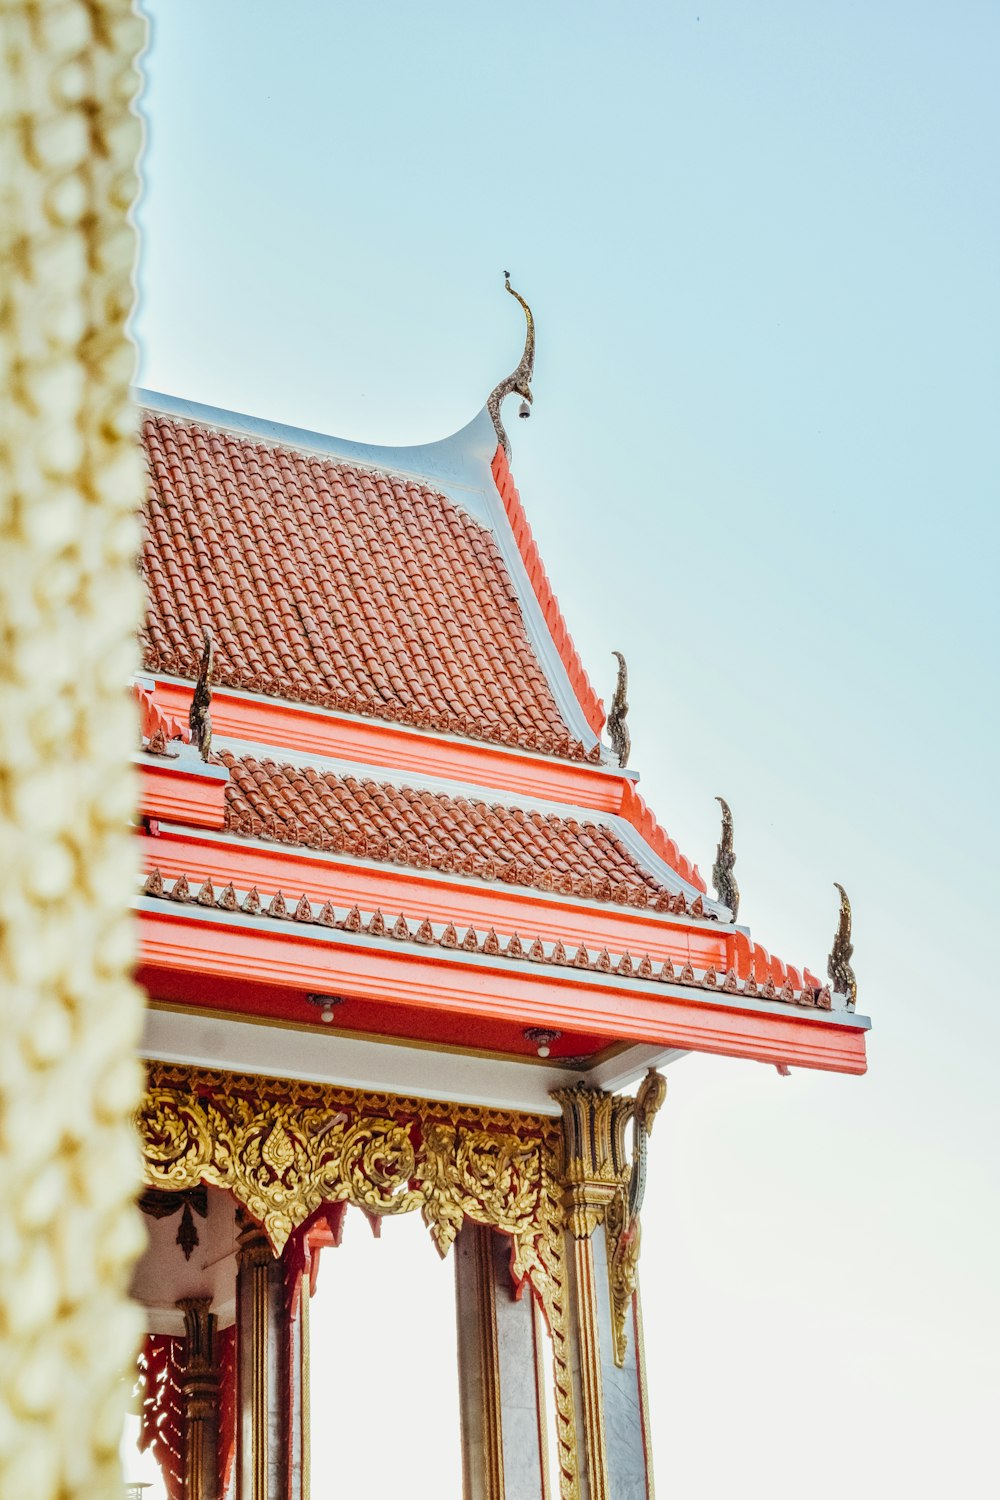 red roofed temple